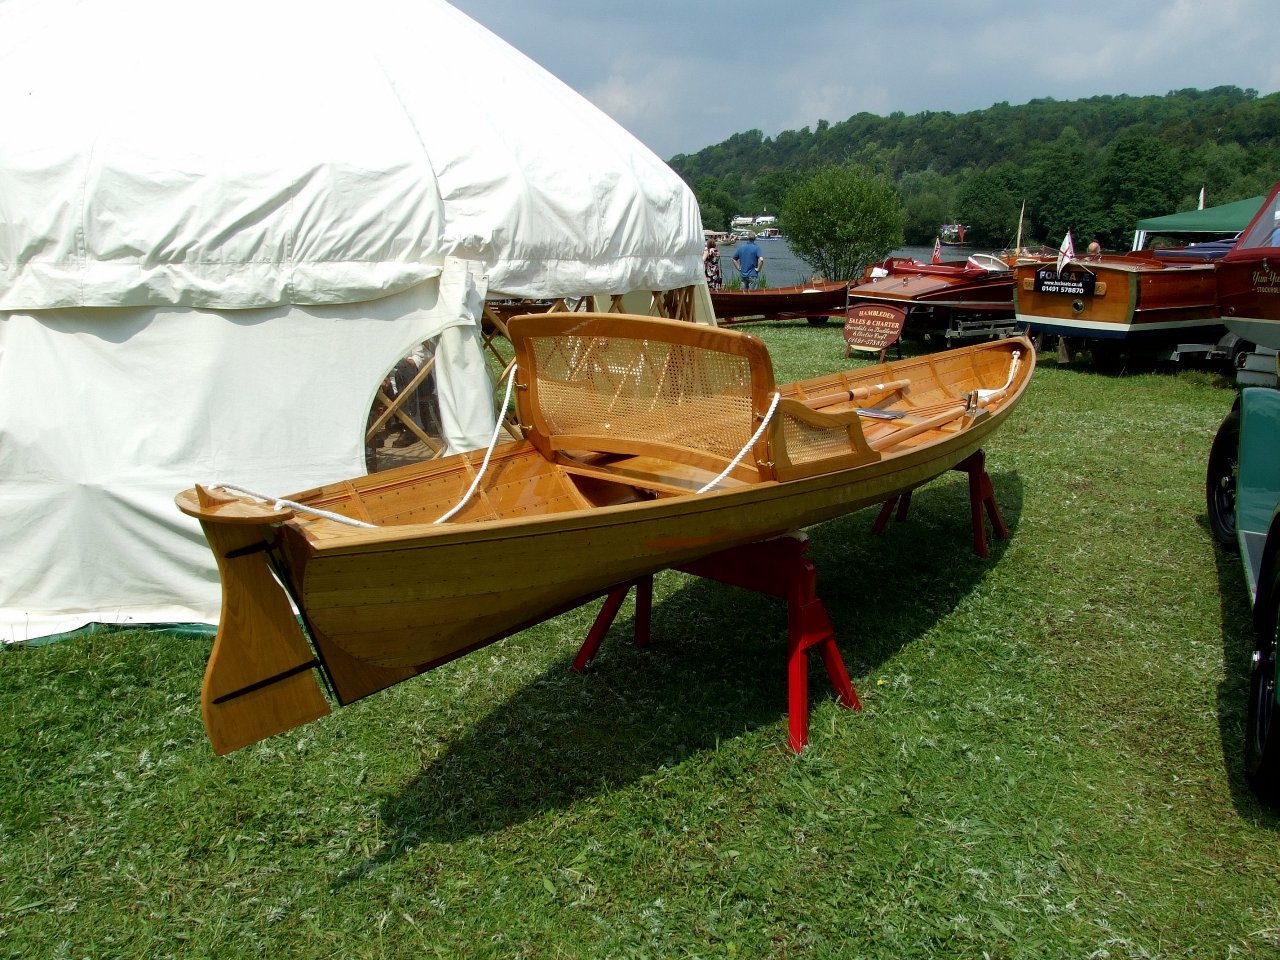 feast of rowing boats at the Beale Park Boat Show | intheboatshed 